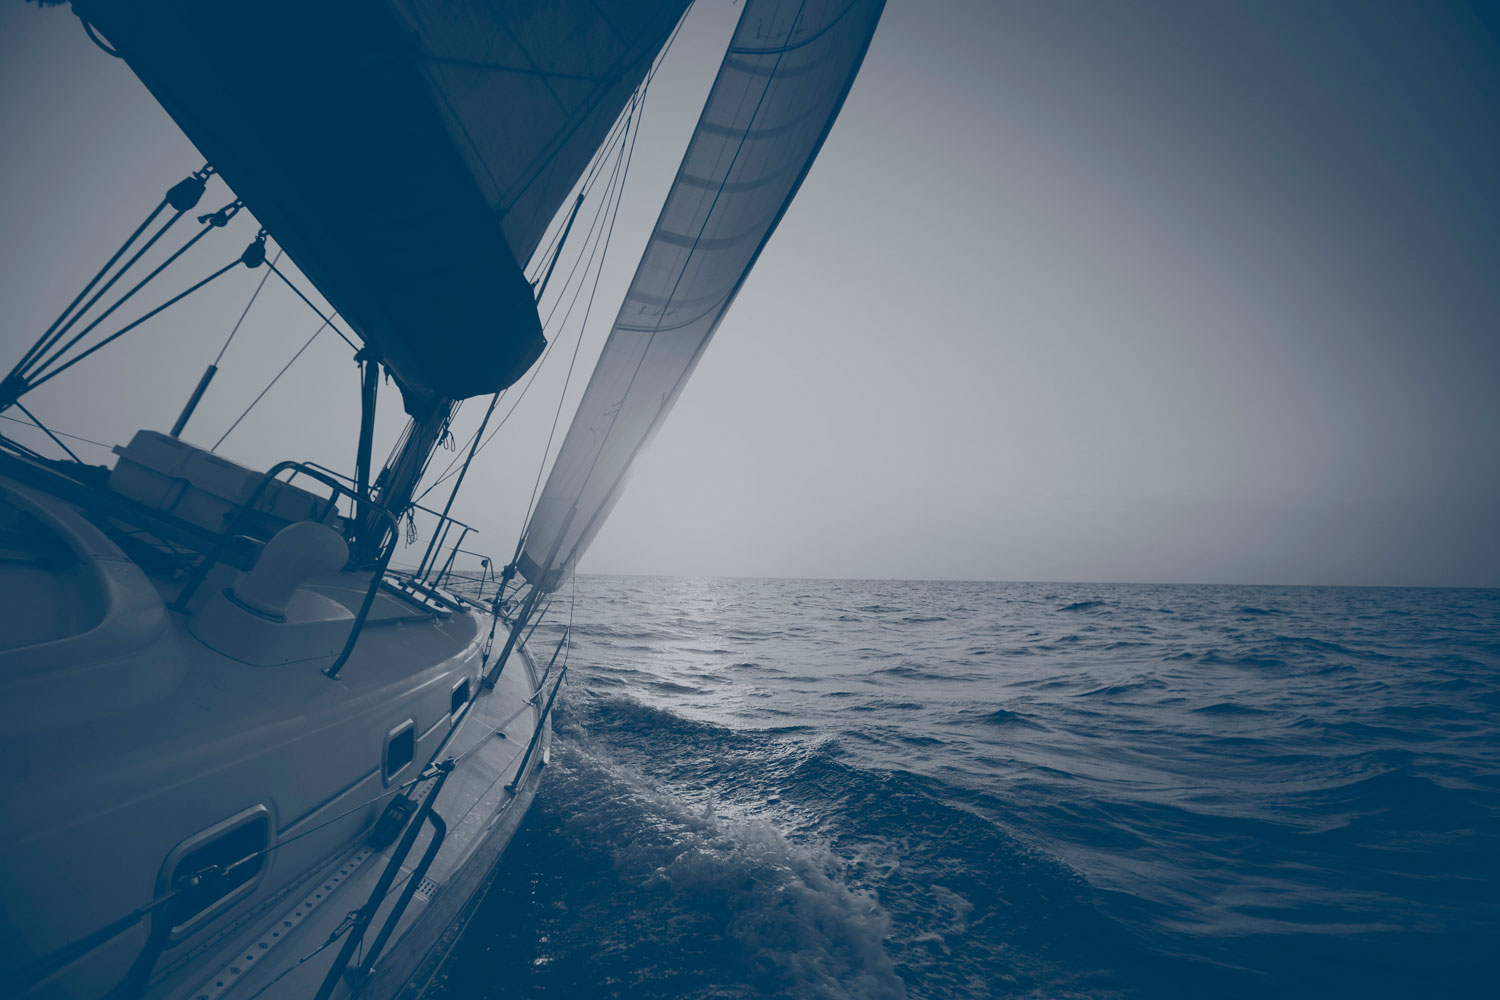 Wealth management firm guiding financial stability like a sailboat on a serene ocean with blue overlay